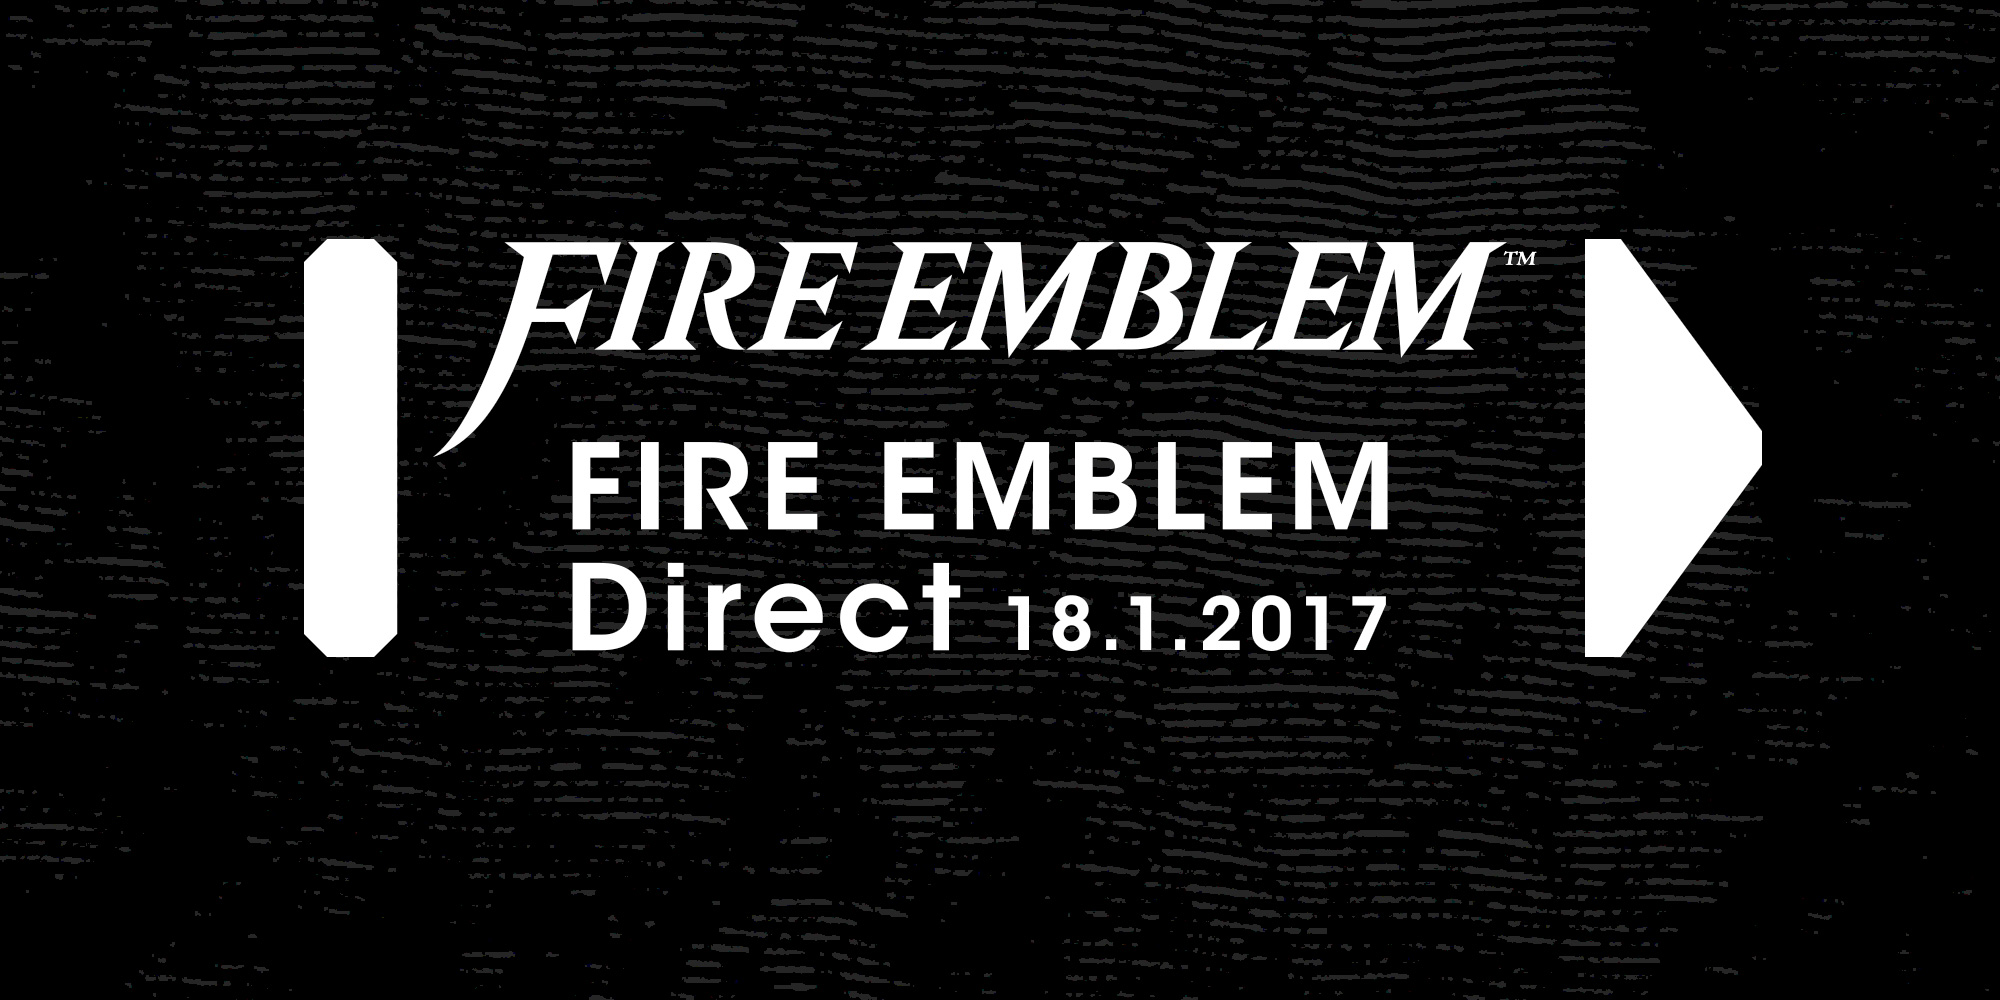 Fire Emblem Nintendo Direct coming on Wednesday 18th January